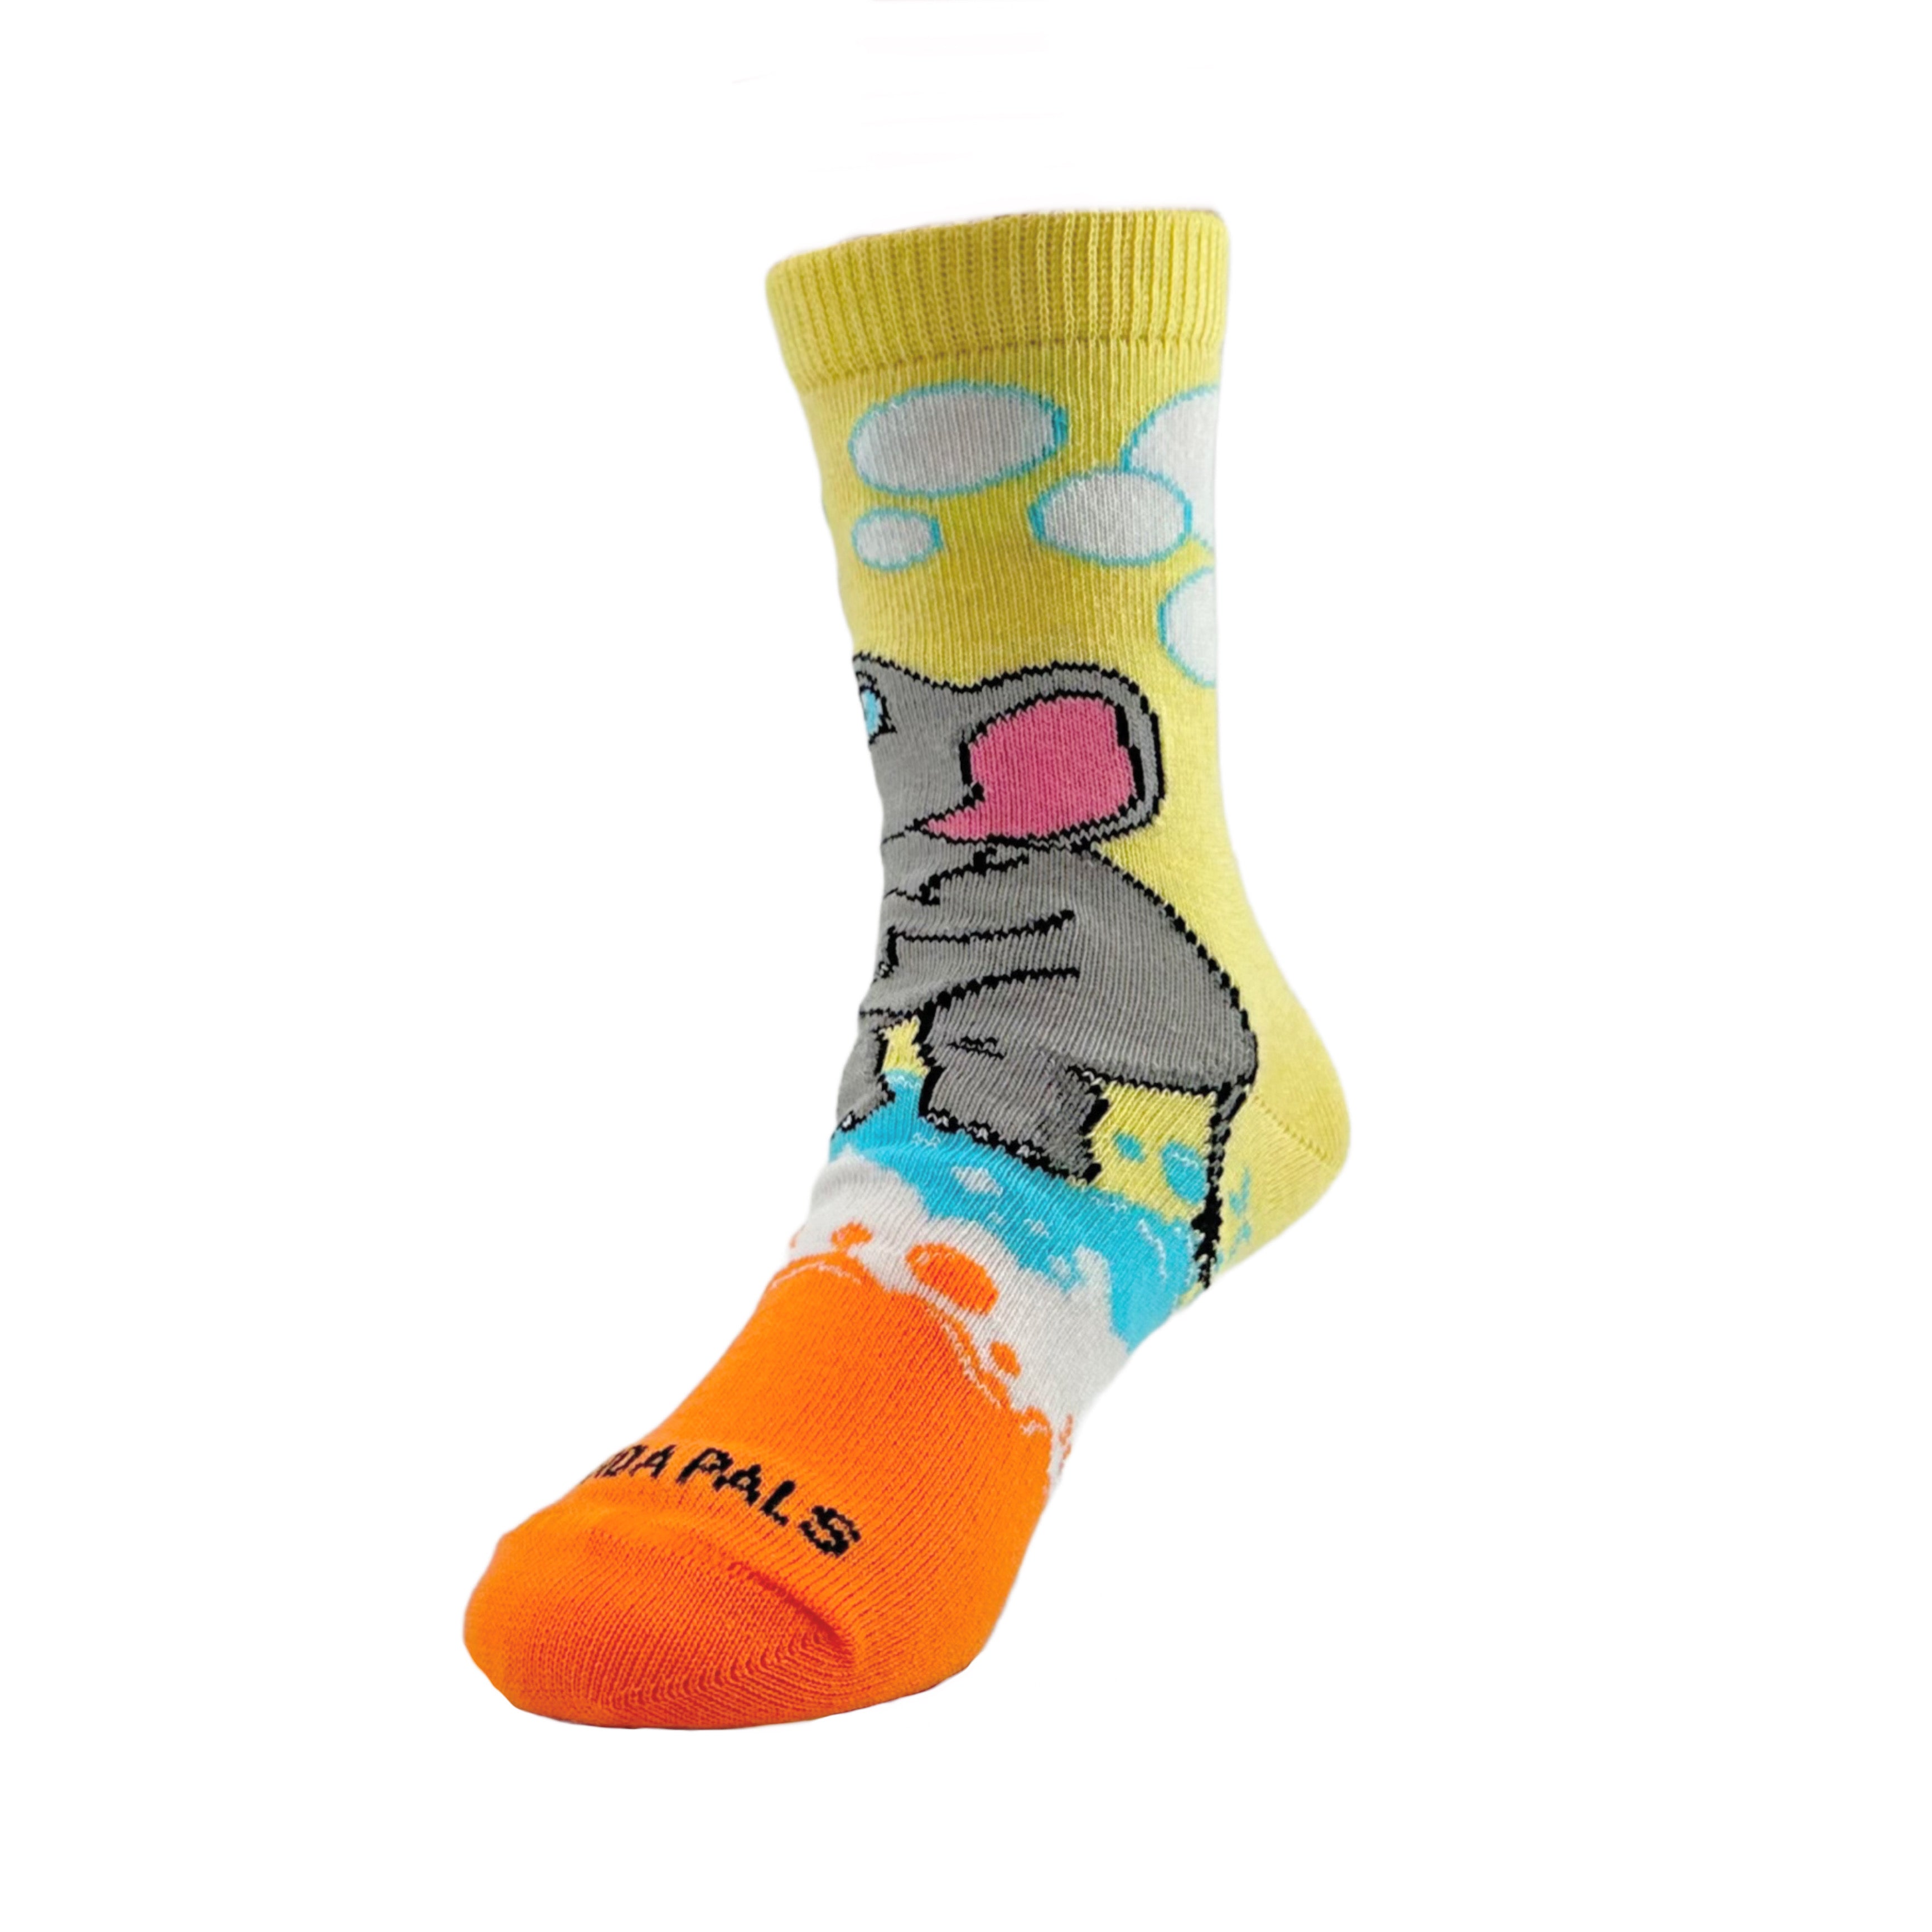 Elephant Bubbles Socks from the Sock Panda (Ages 3-7)